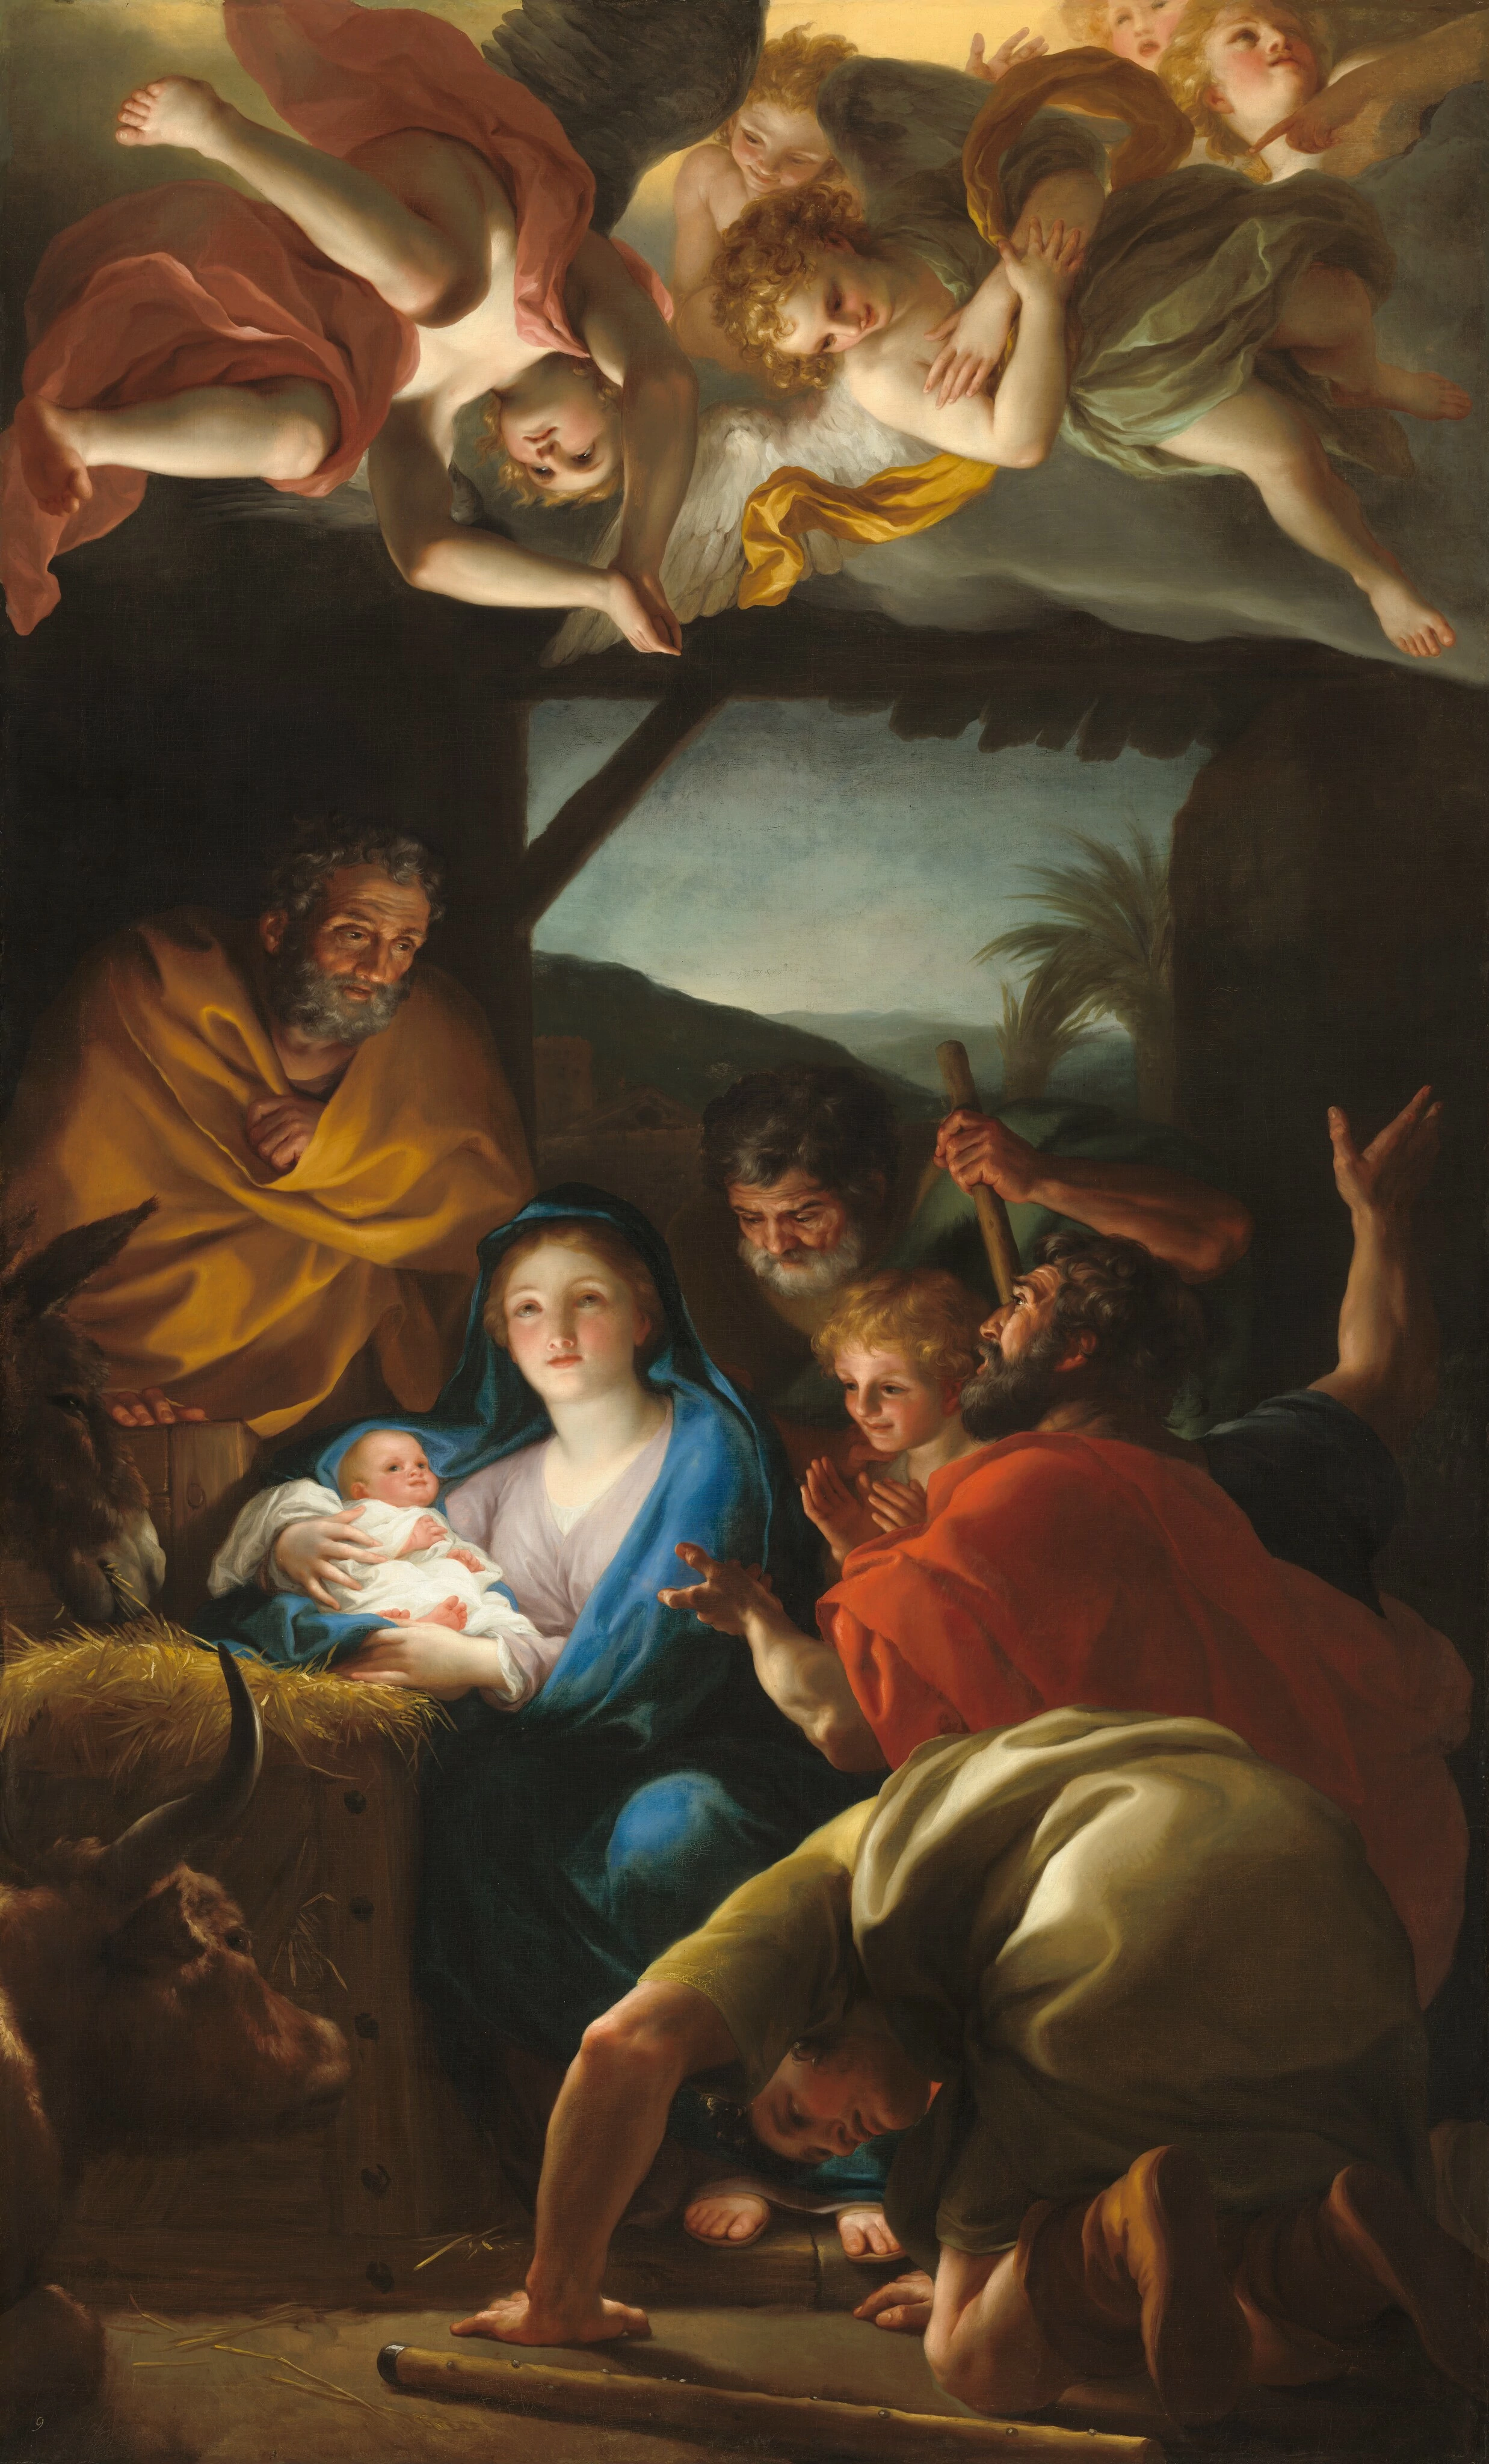 The Adoration of the Shepherds, Anton Raphael Mengs